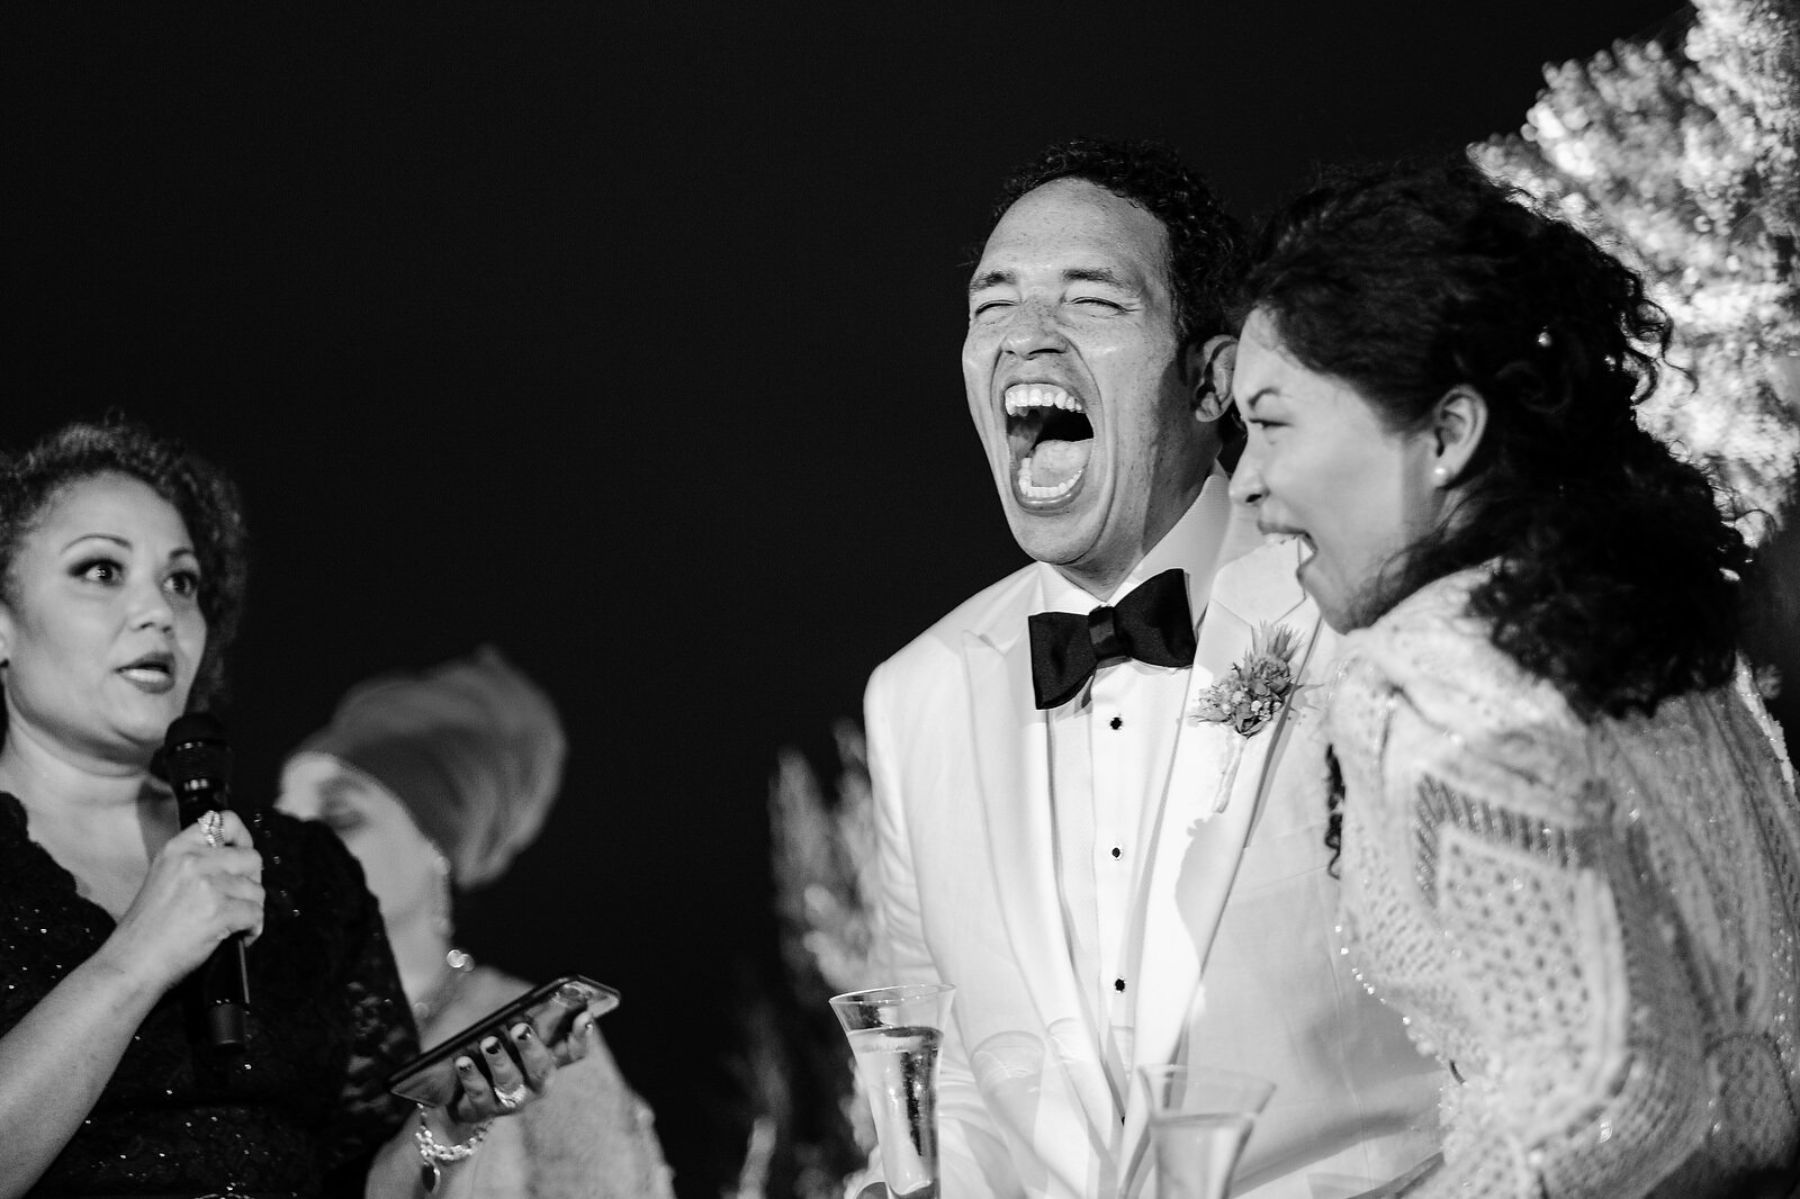 Newlyweds laughing together